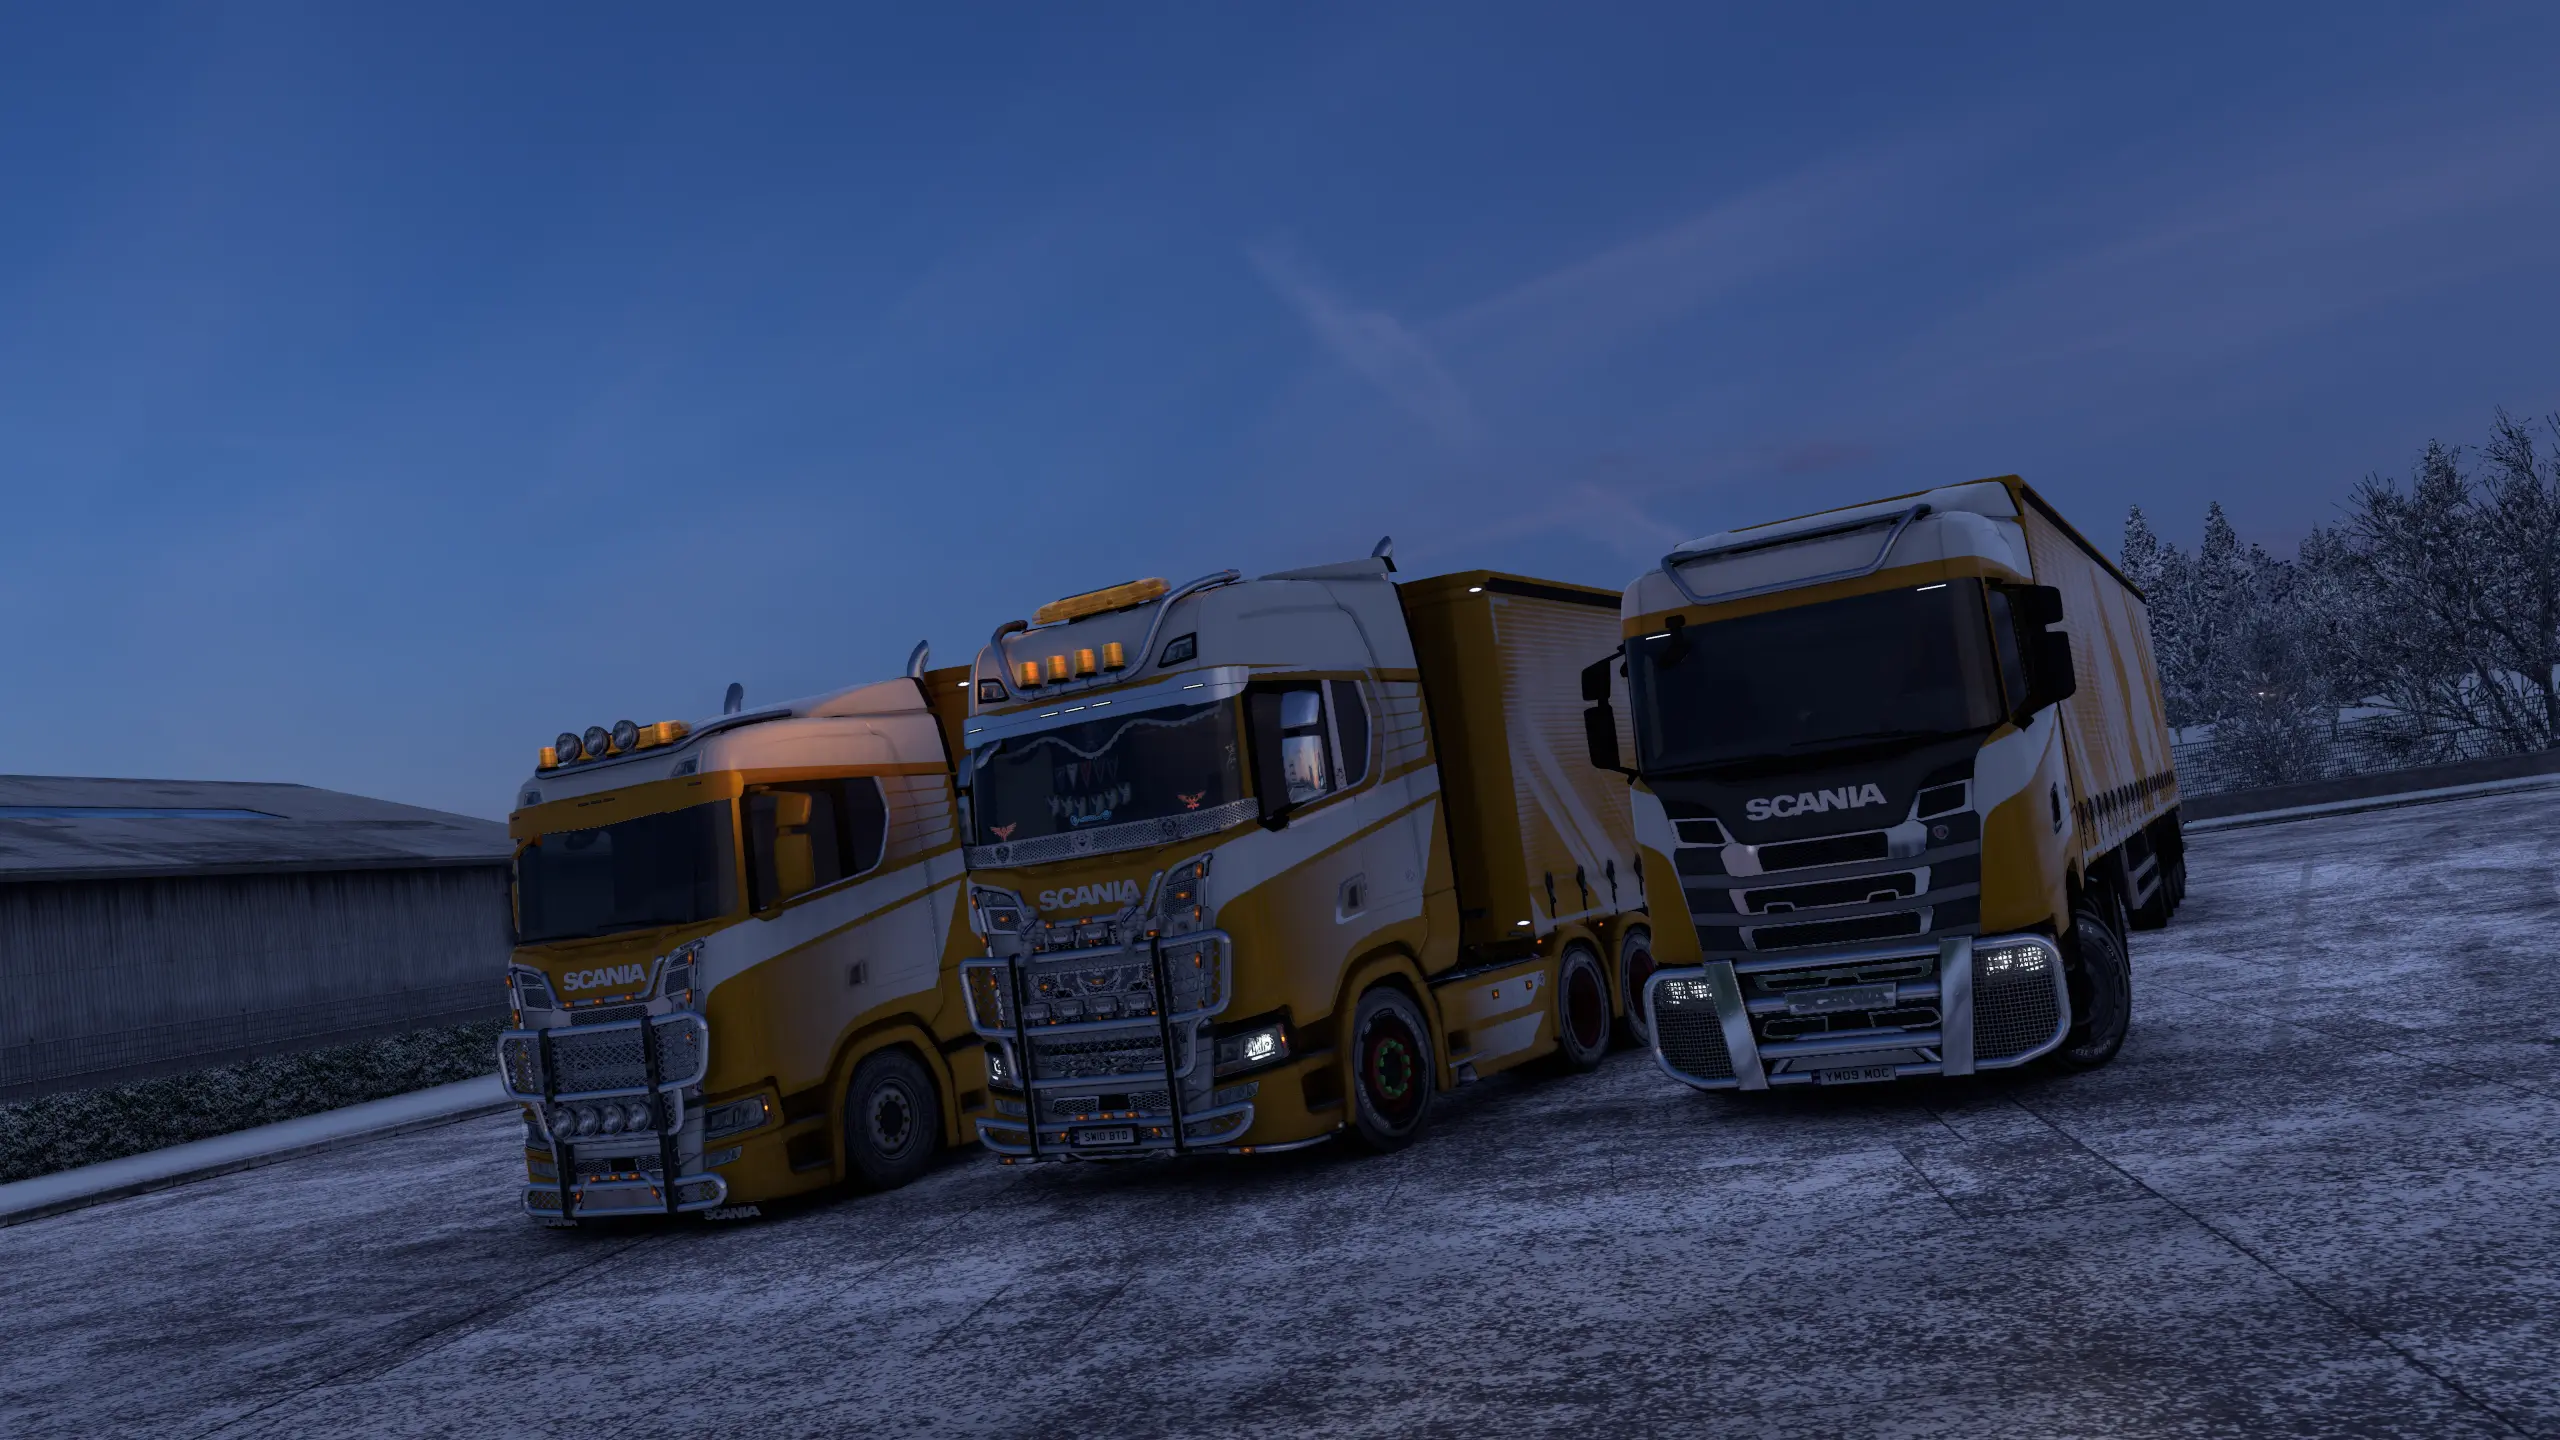 Three GPE trucks parked in a company with a very early version of the GPE paint job